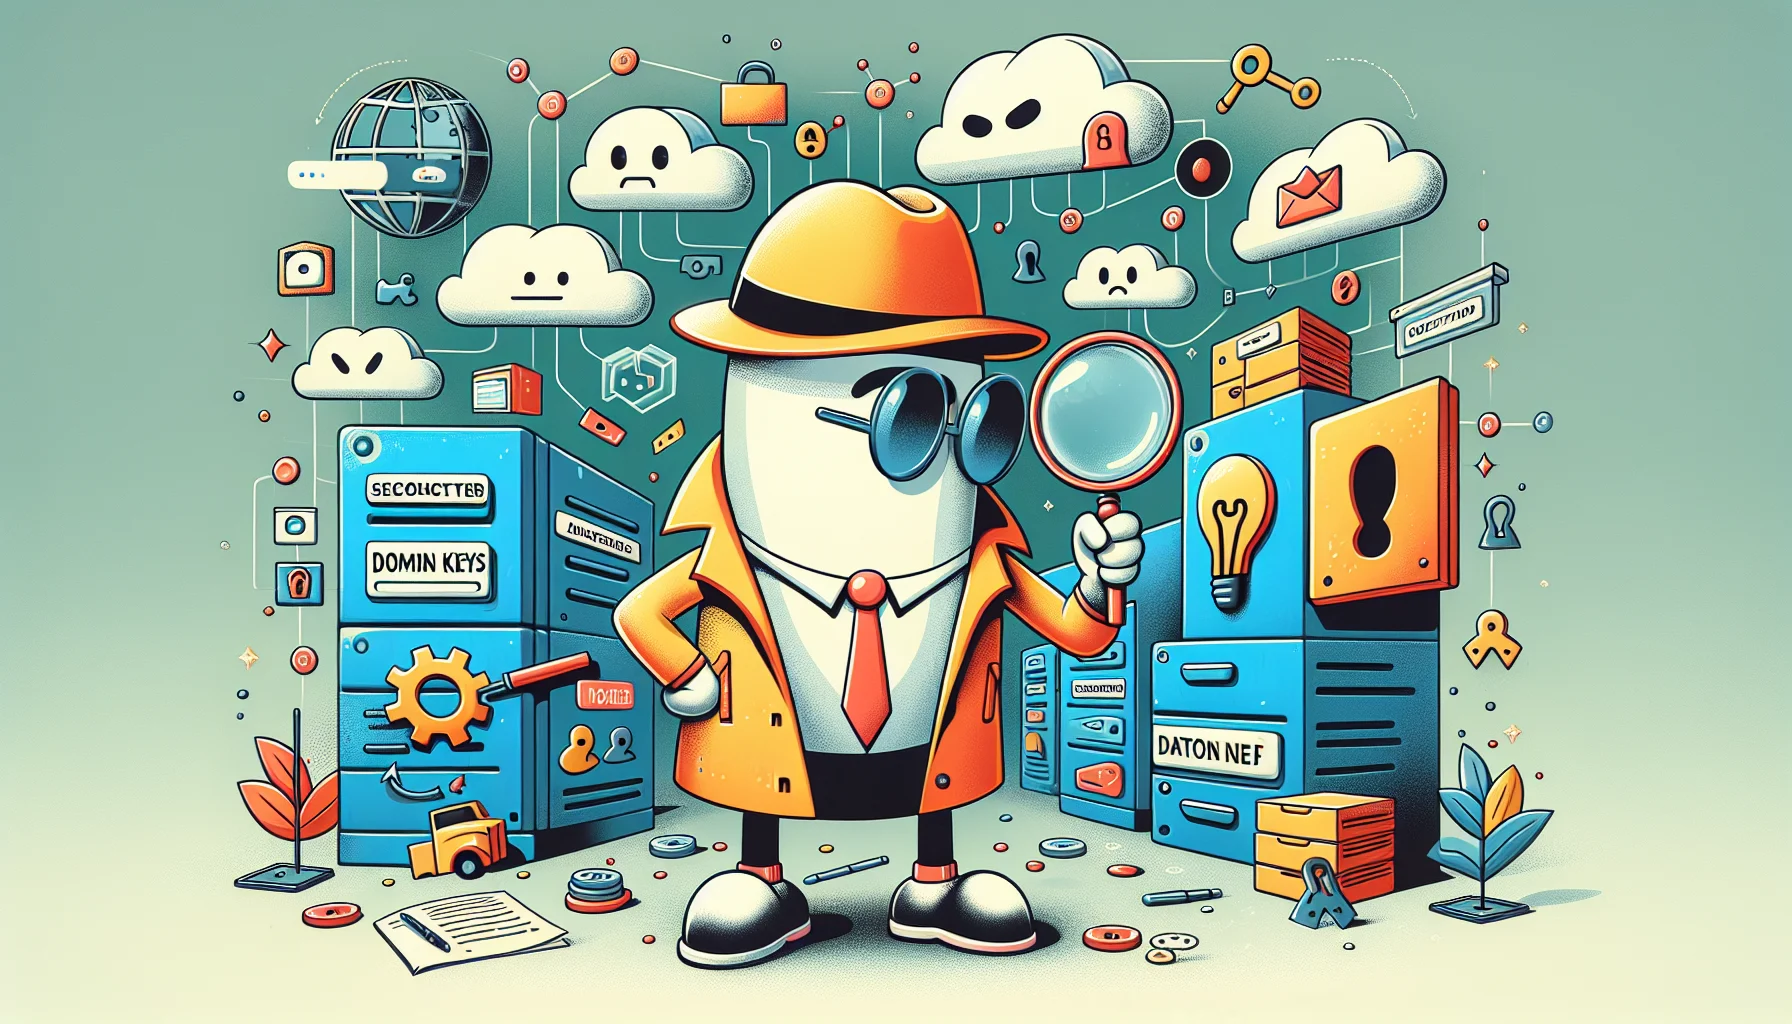 Generate a humorous scene in a digital environment. Central in the frame is an abstracted, anthropomorphized icon representing DKIM (DomainKeys Identified Mail), donned in detective's attire, as if it's solving complex mysteries with a magnifying glass. Around the icon, visual metaphors of web hosting elements are evident - servers, cloud storage, data flow, and domain names. The overall tone is bubbly and enticing, making light of the serious business of web hosting. Add a tagline below in bold, catchy font: 'Making Web Hosting A Walk in The Park' to lighten up the atmosphere further.